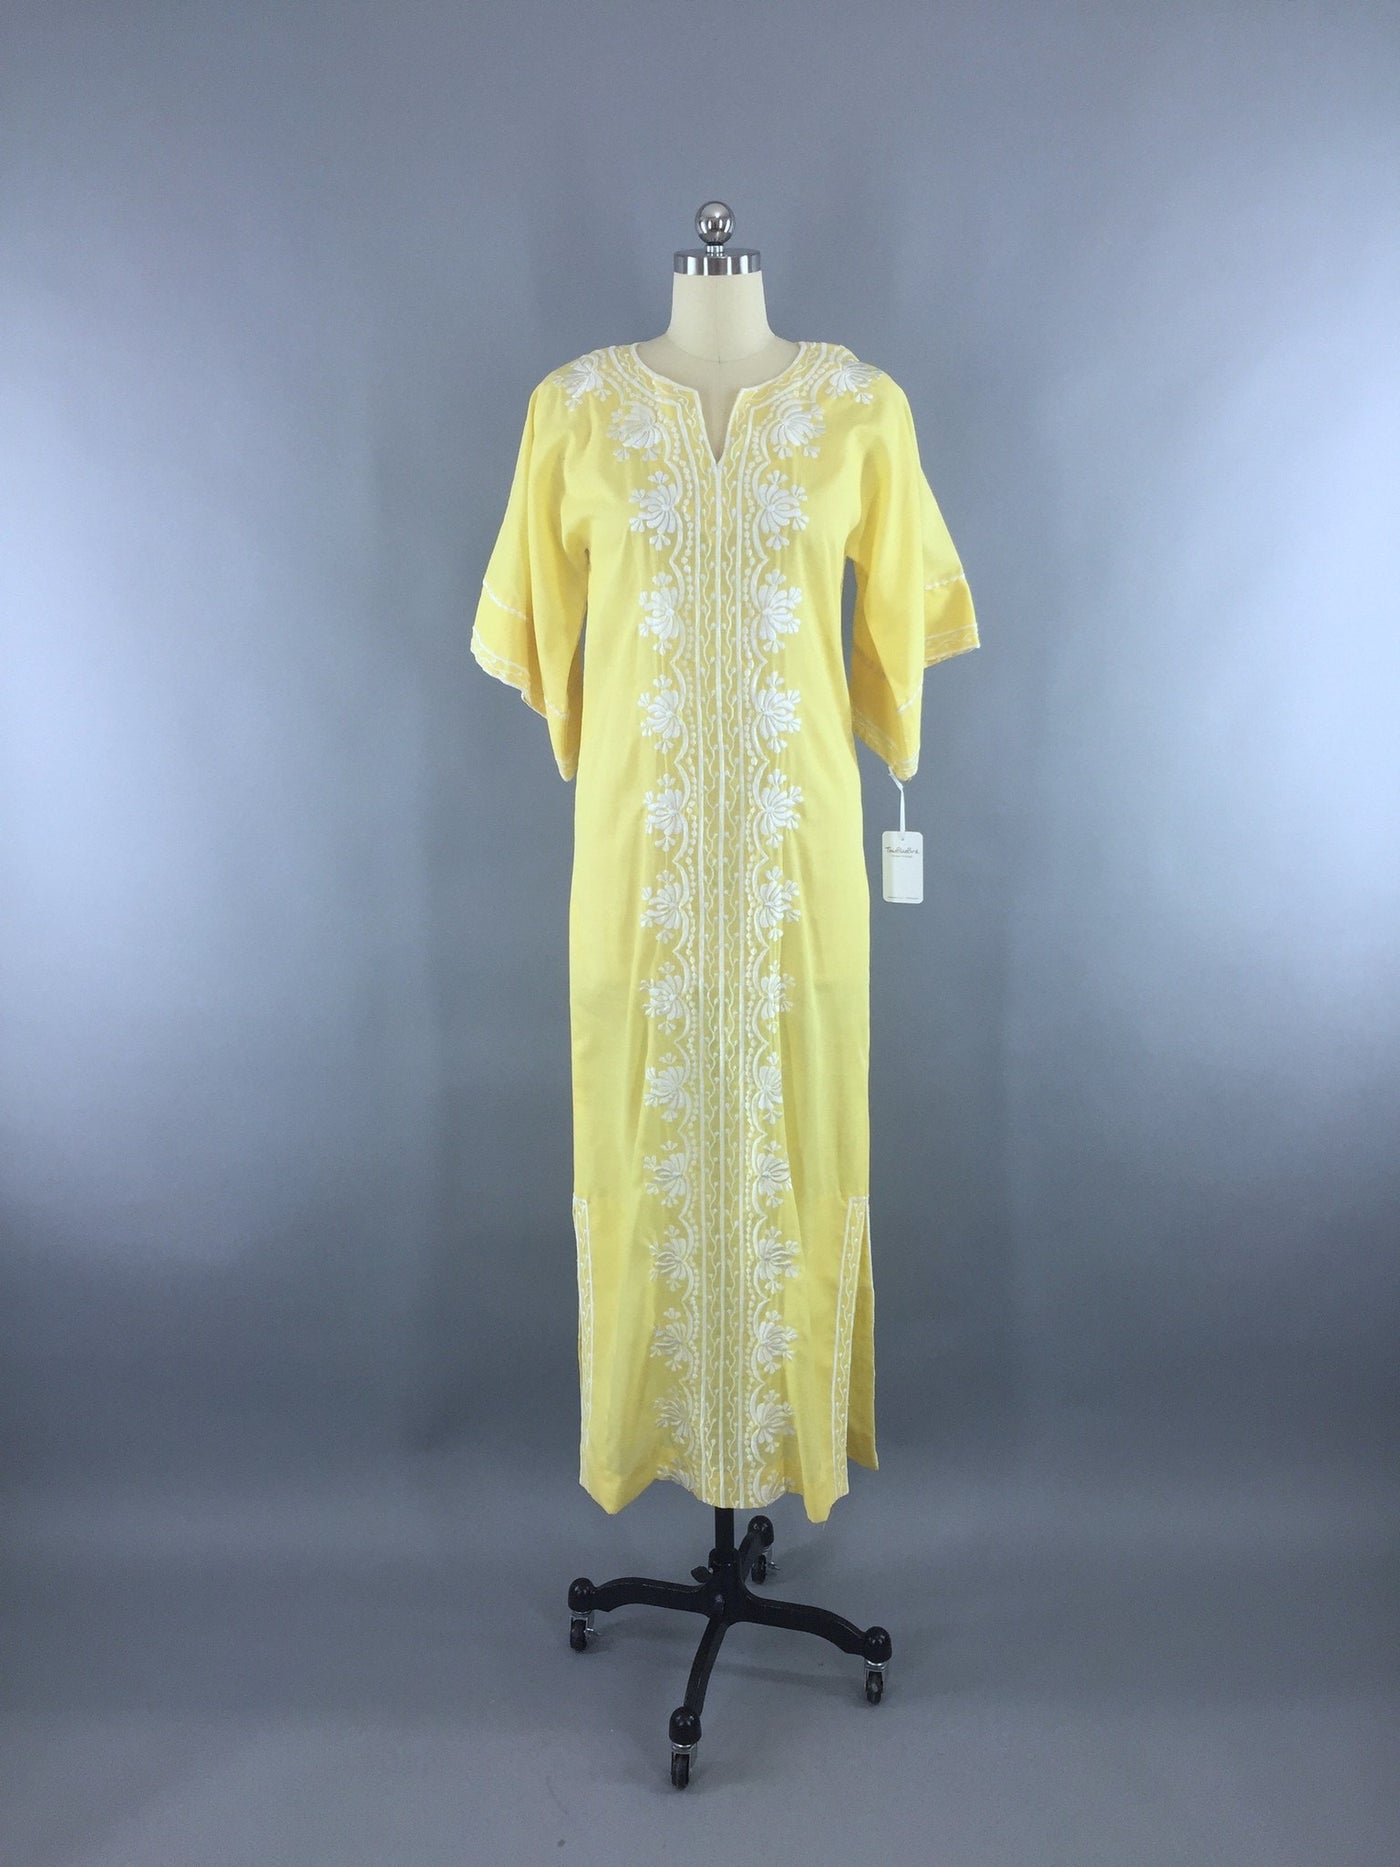 Vintage 1960s Embroidered Festival Caftan Dress - ThisBlueBird